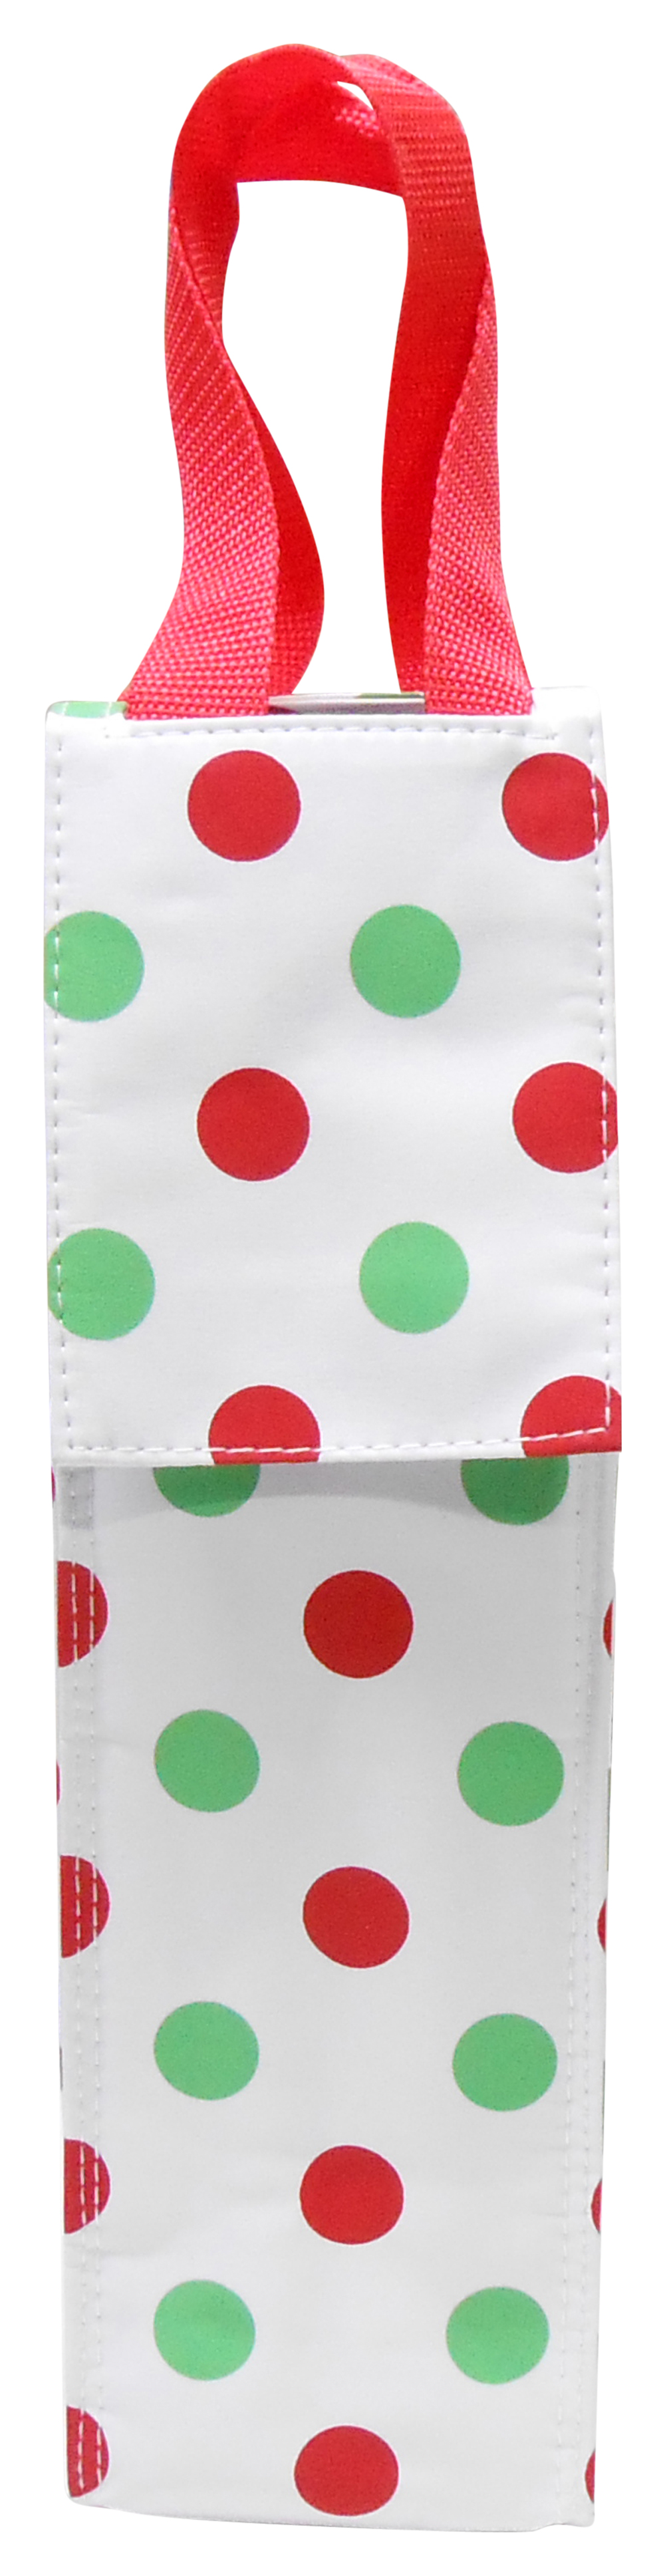 Insulated Wine Bottle Tote w/ Monogrammable Flap - MULTI POLKA DOTS